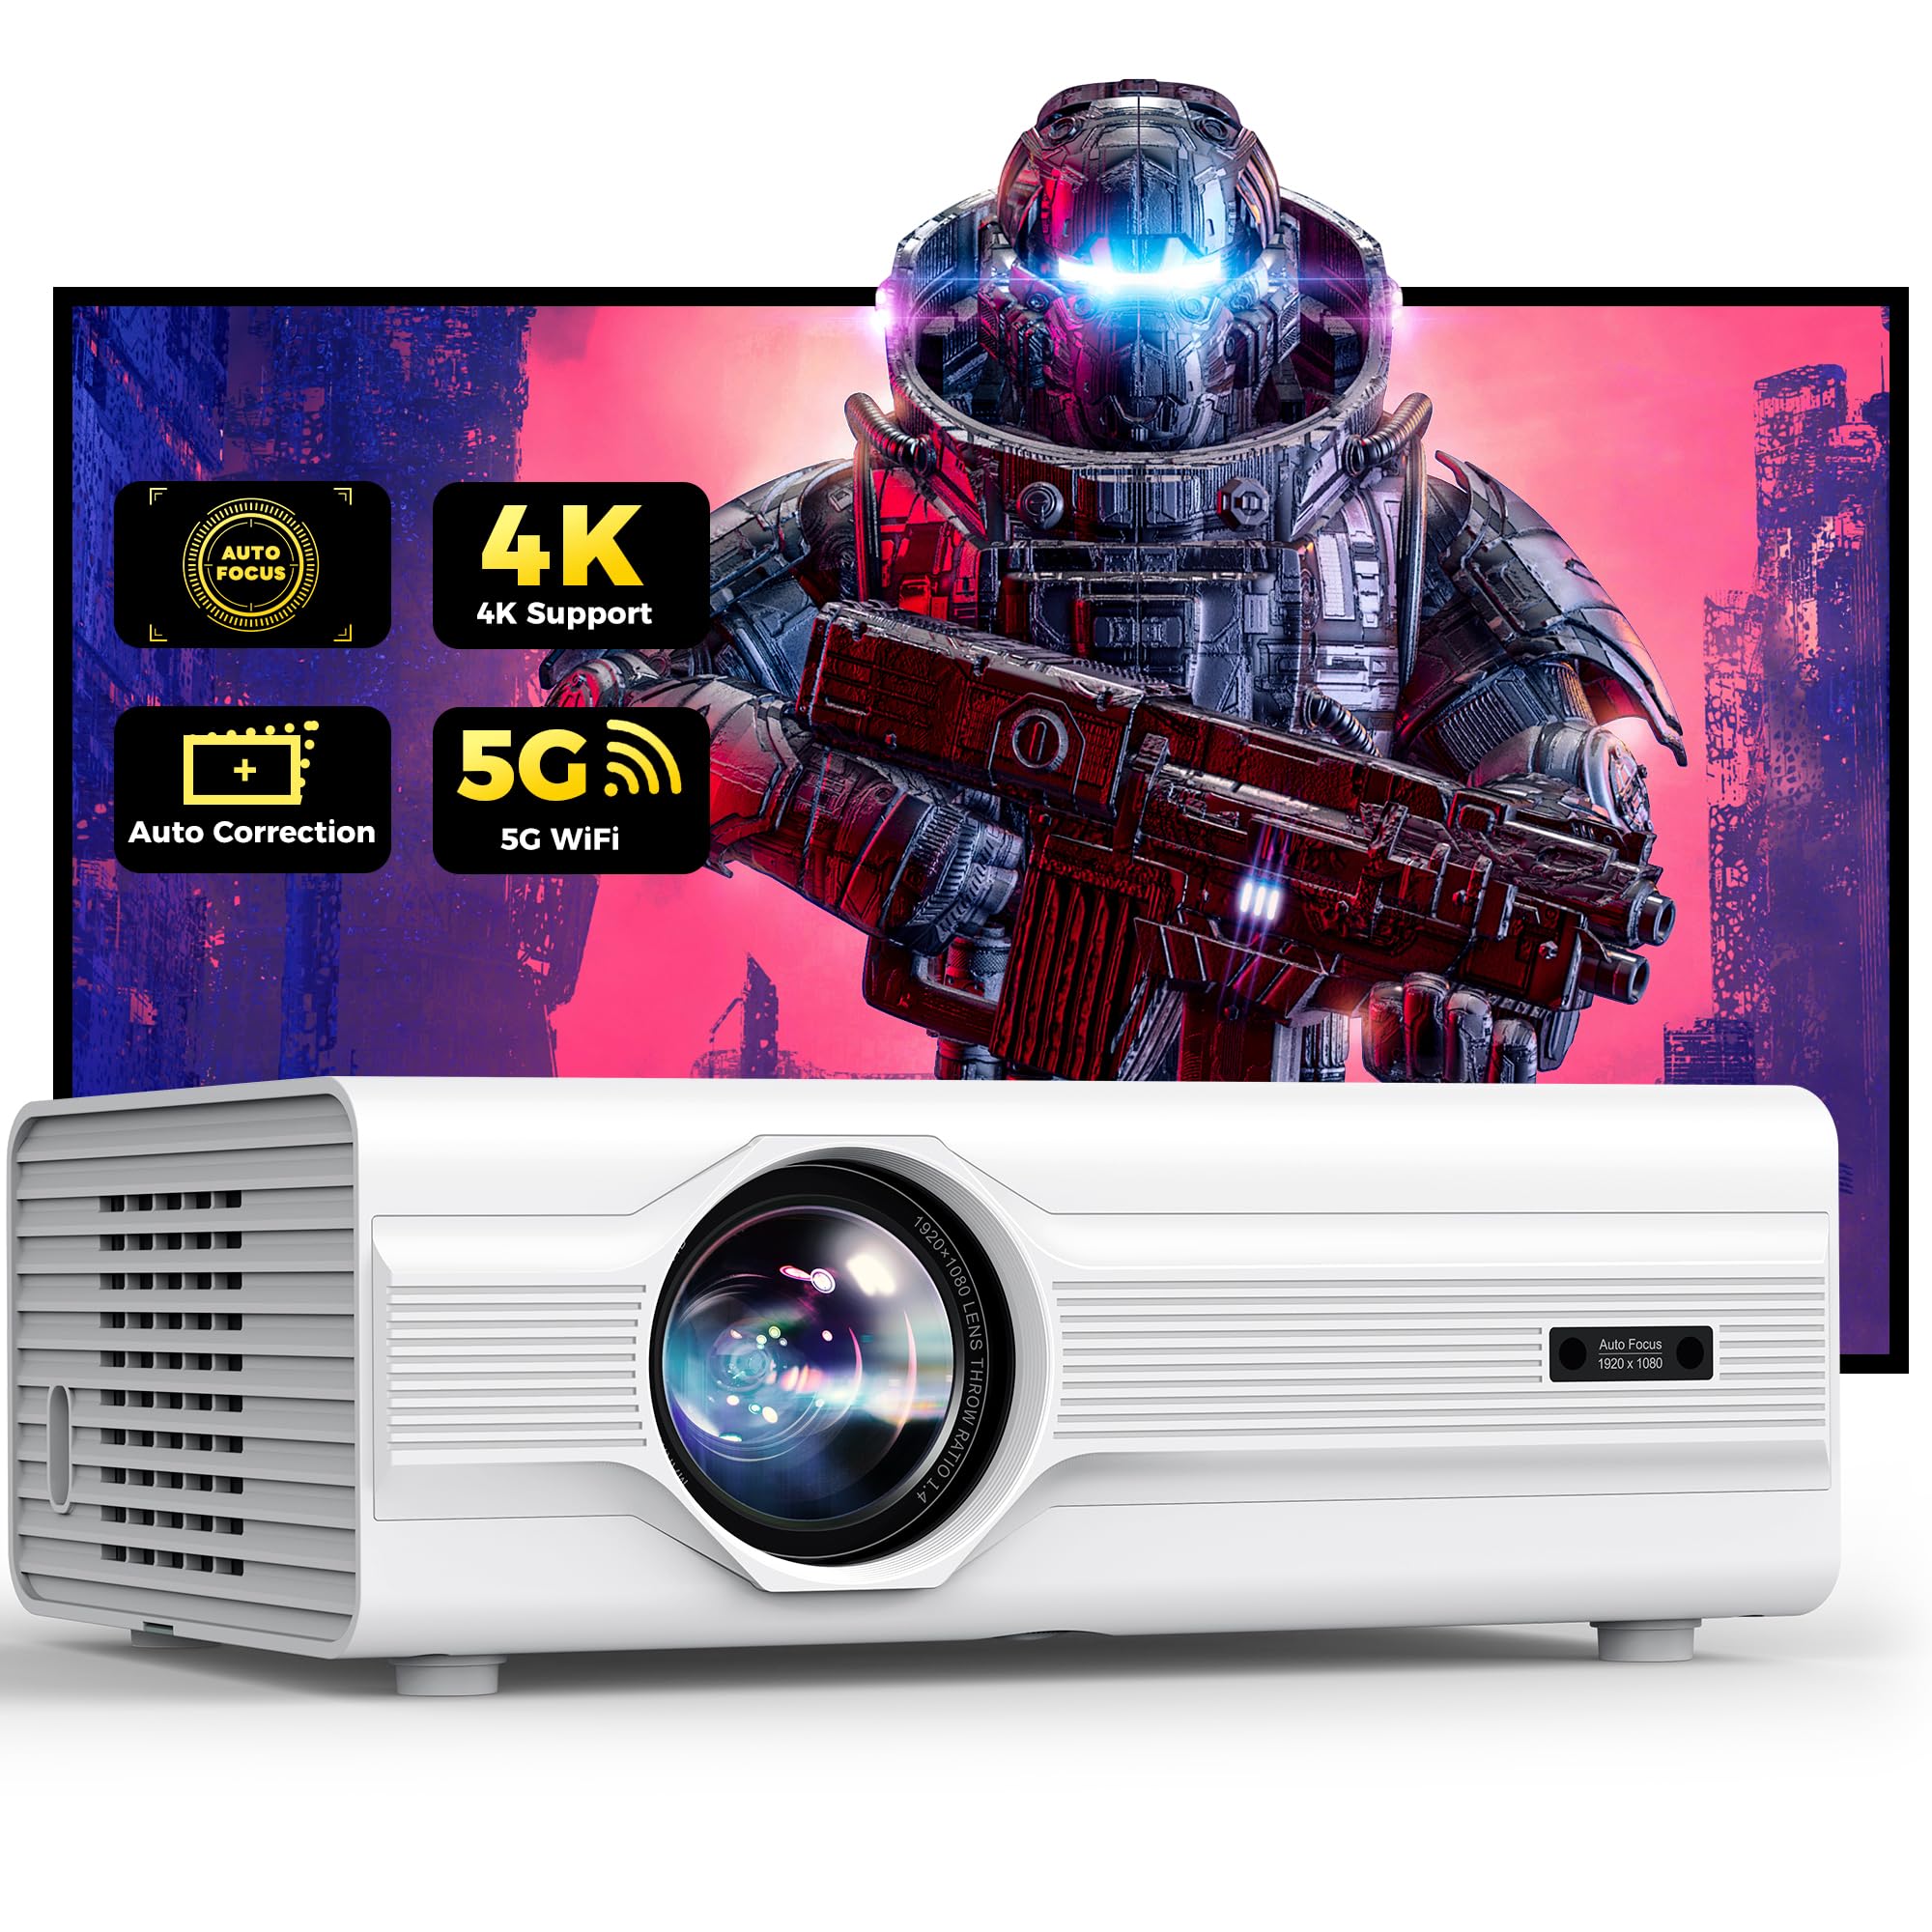 [Auto Focus/Keystone] Projector with WiFi 6 and Bluetooth 5.2, Native 1080P 4K Supported, Agreago Outdoor Projector with Screen, Home Projector Compatible with PowerPoint/iOS/Android/HDMI/USB/TV Stick